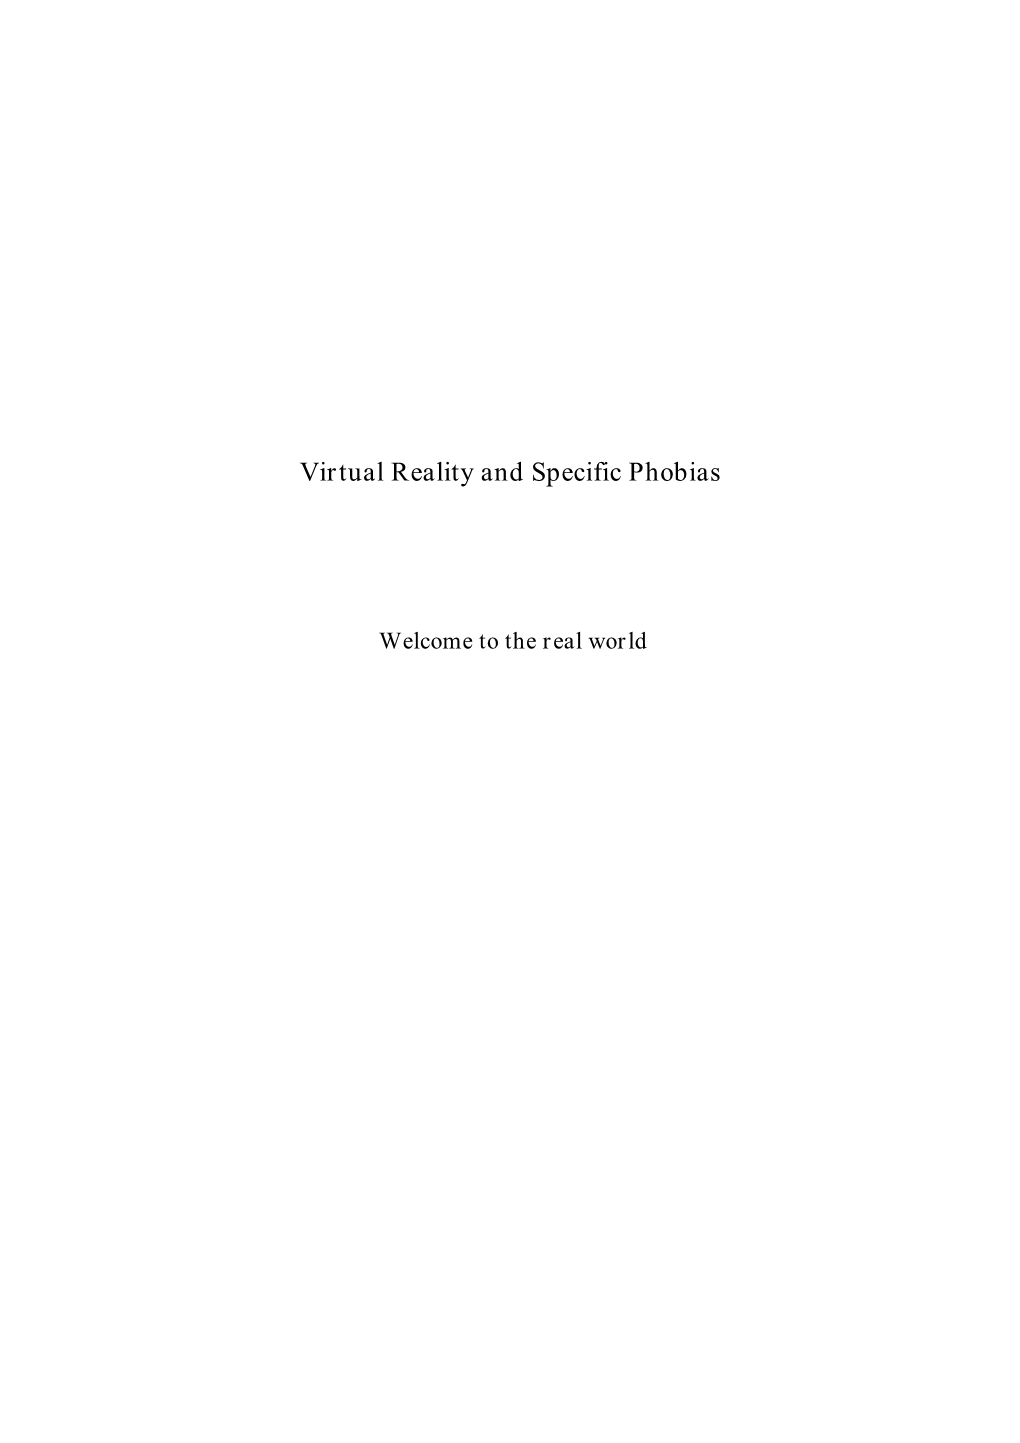 Virtual Reality and Specific Phobias